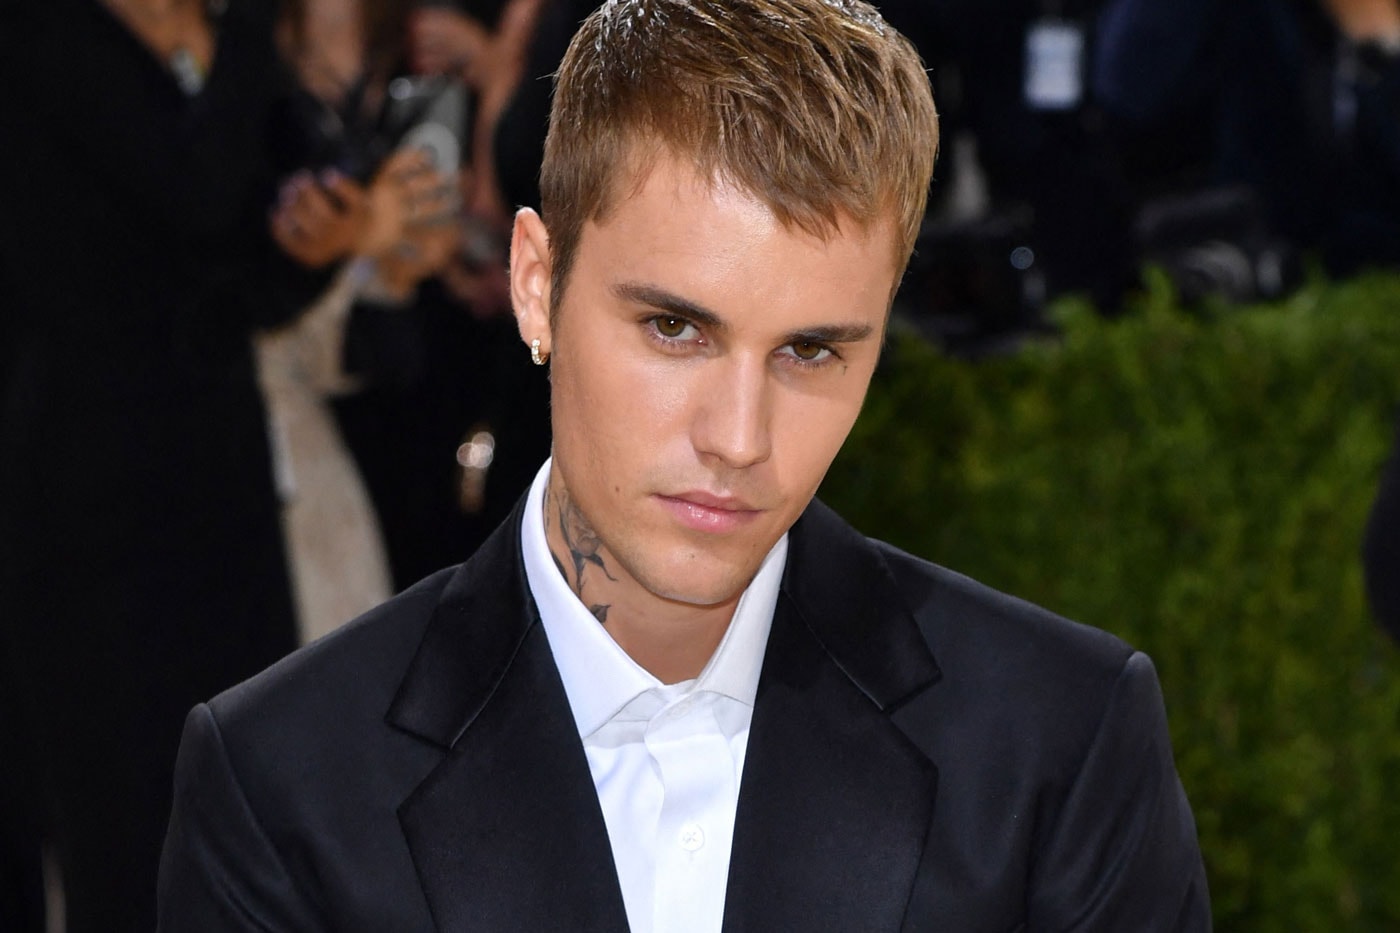 Justin Bieber Covers Tupac's "Thugz Mansion"